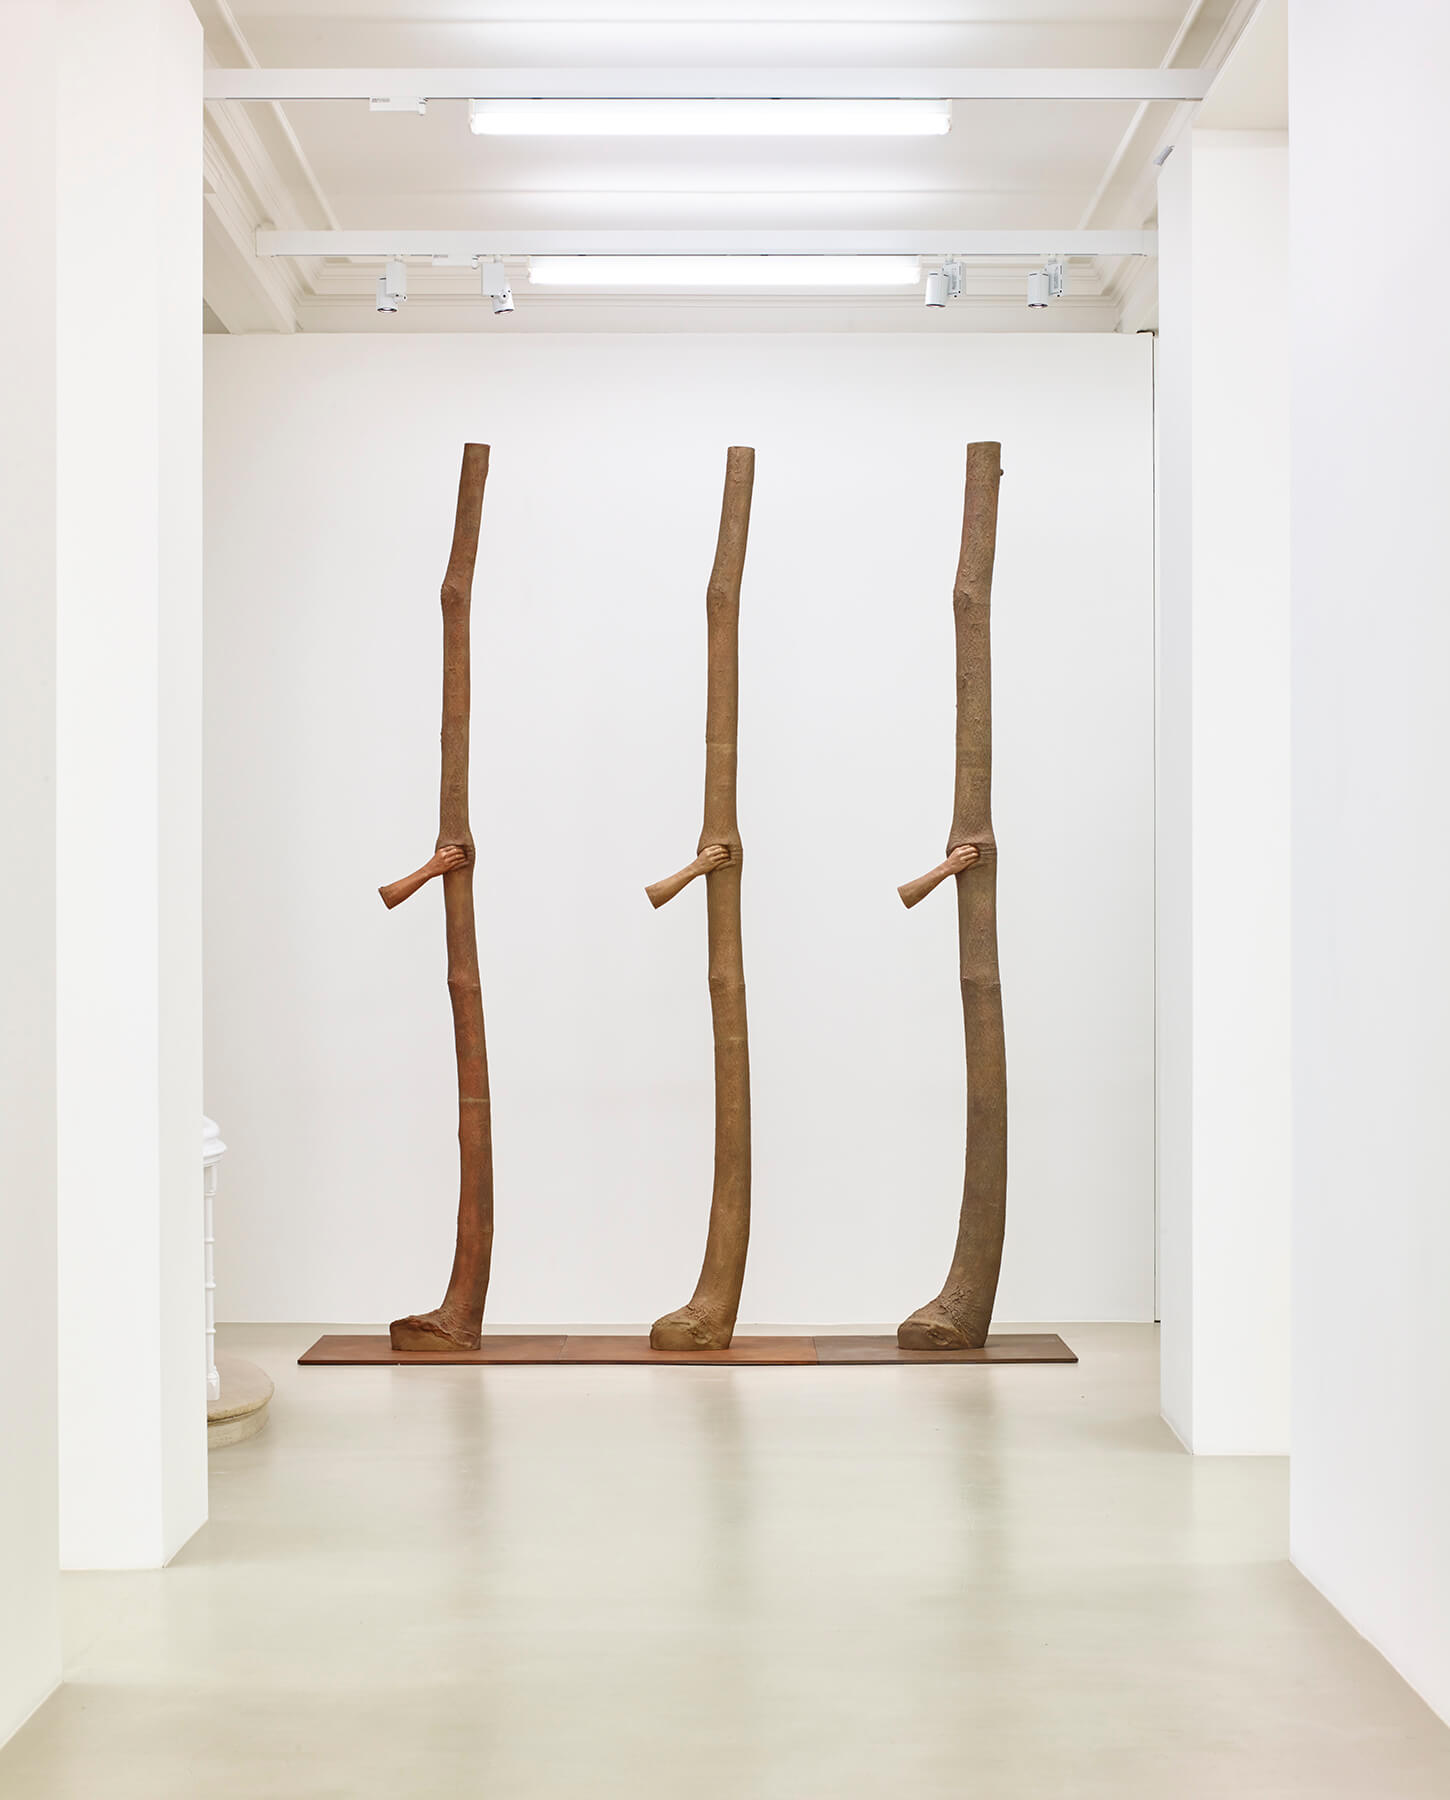 Giuseppe Penone, Fui, Sarò, Non sono (I was, I will be, I am not) Installation view at Marian Goodman Gallery London